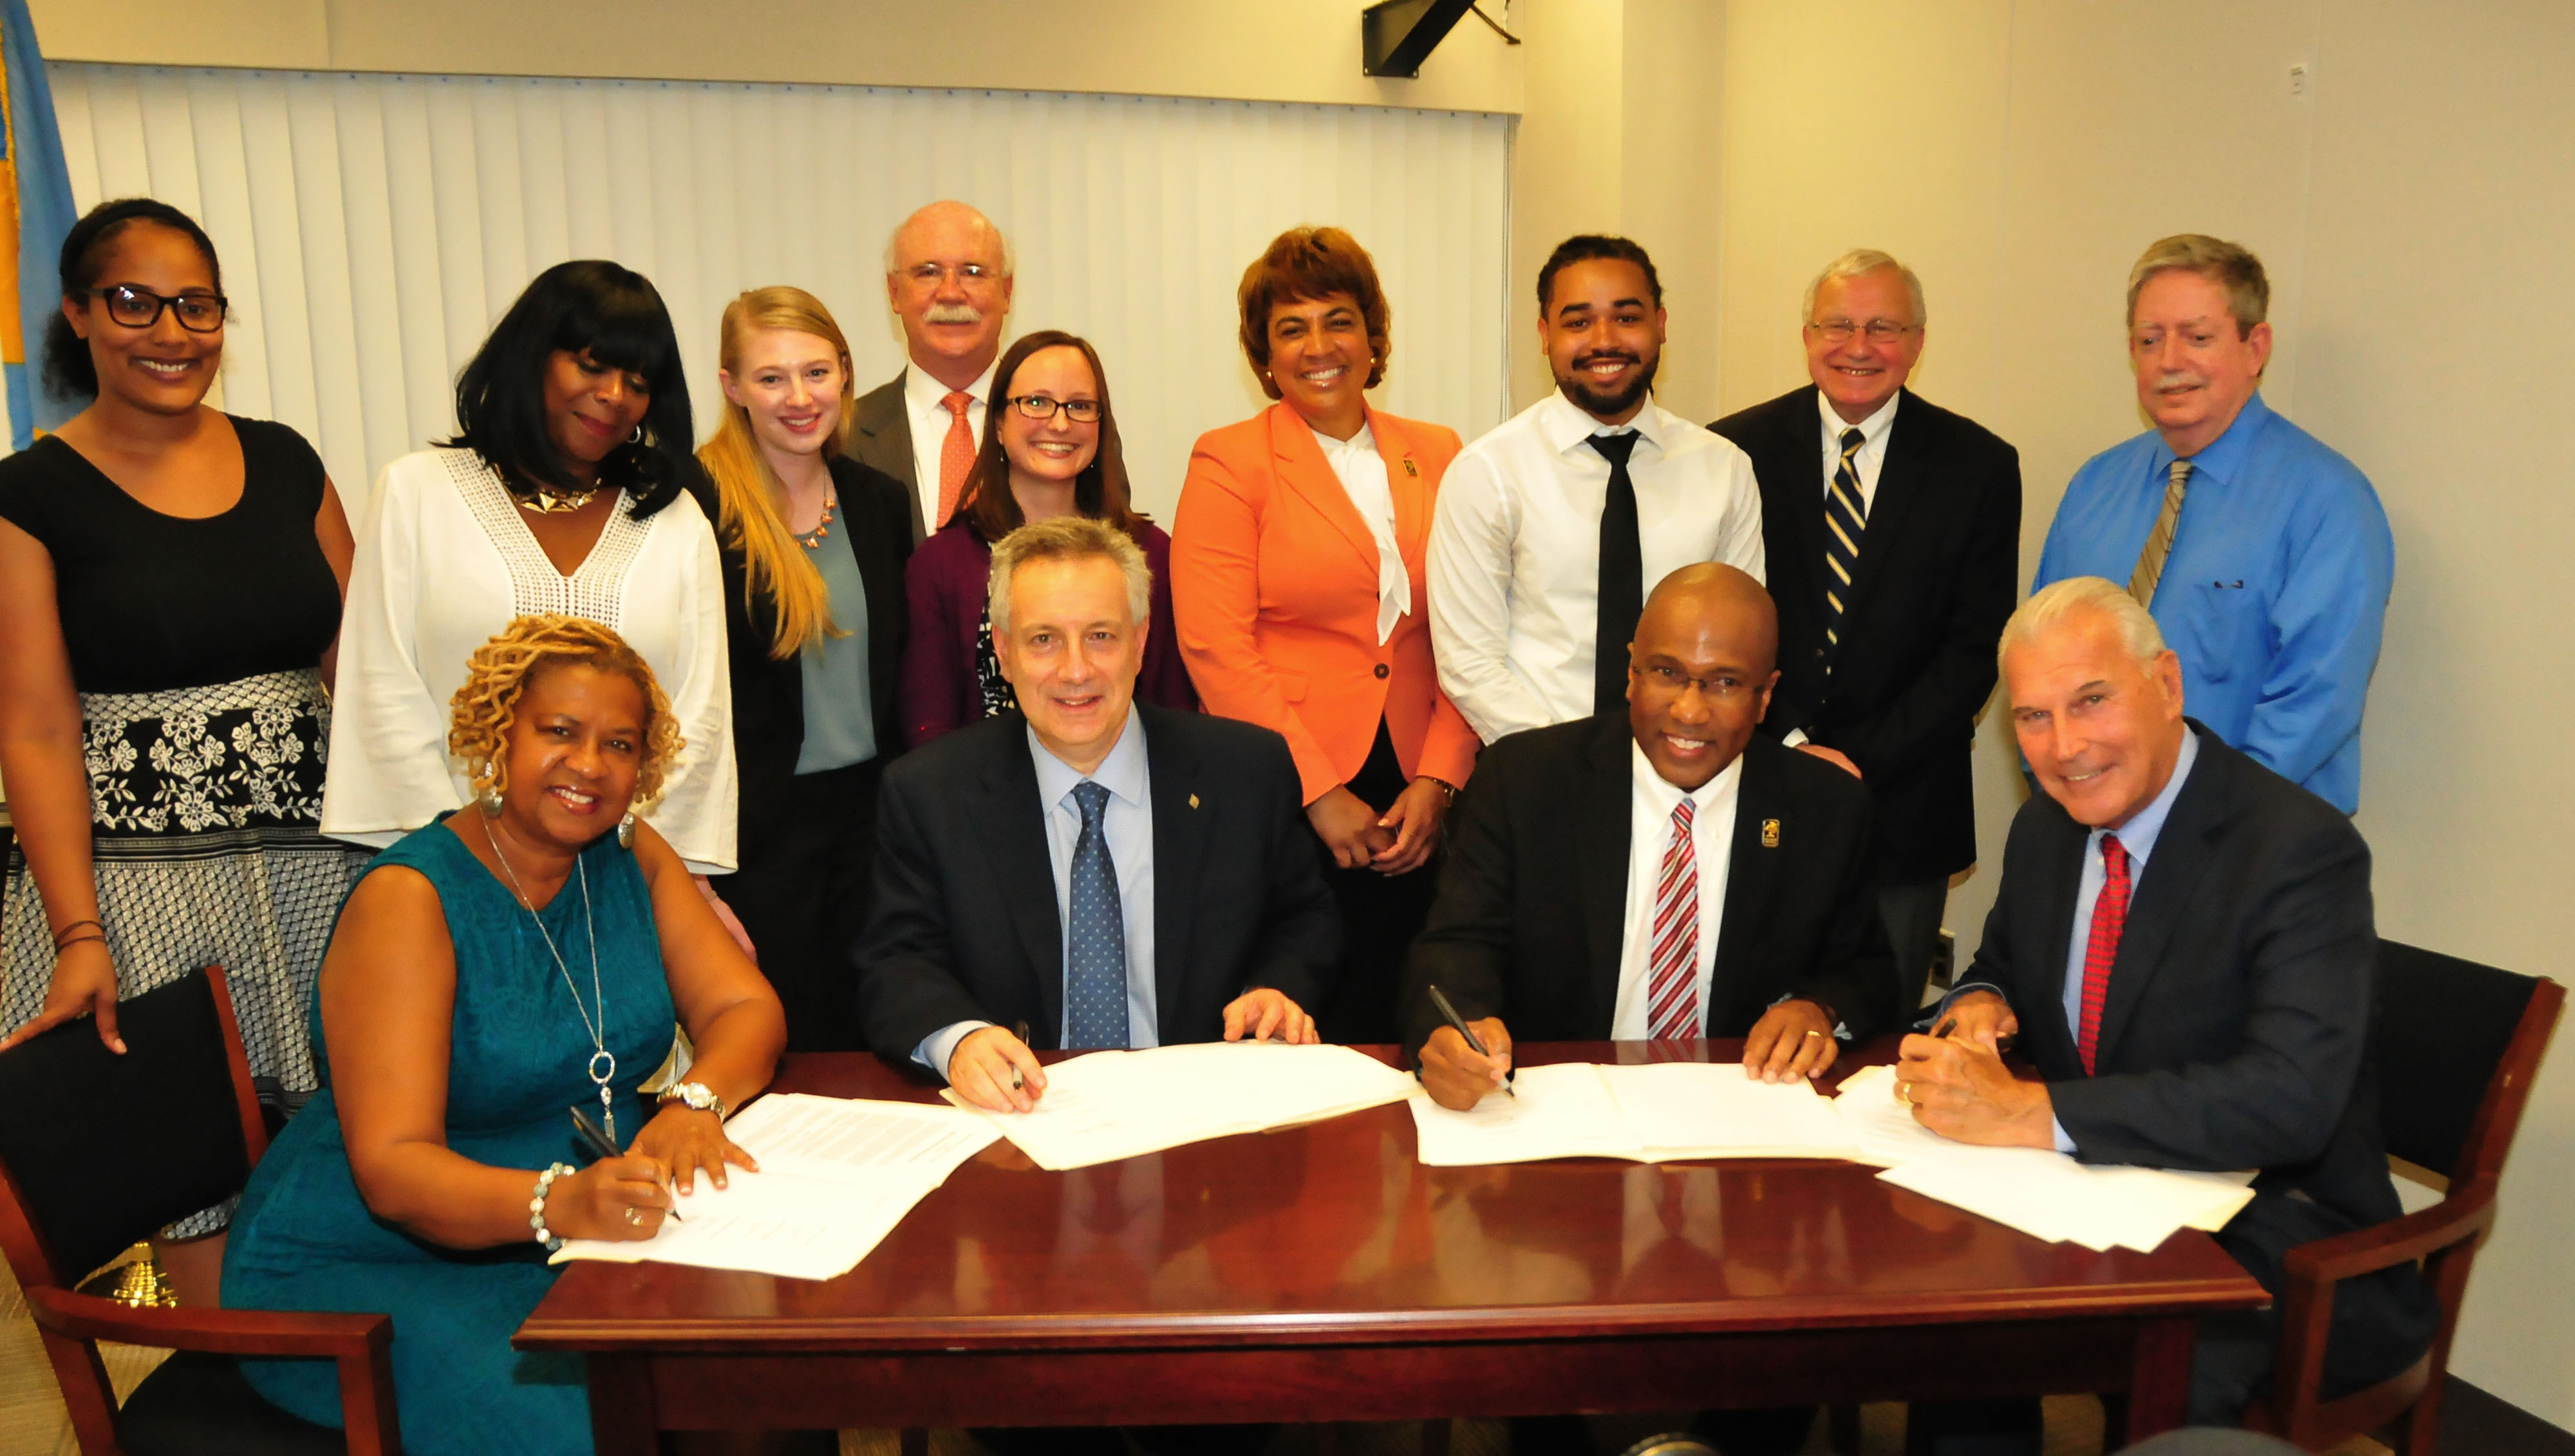 (Seated l-r) Wilmington Council President Hanifa Shabazz, UD President Dennis Assanis, DSU President Harry L. Williams and Wilmington Mayor Mike Purzycki prepare to sign a cooperation and assistance agreement that will benefit the city, its residents and businesses. Representatives of UD, DSU and the city stand behind the signees.